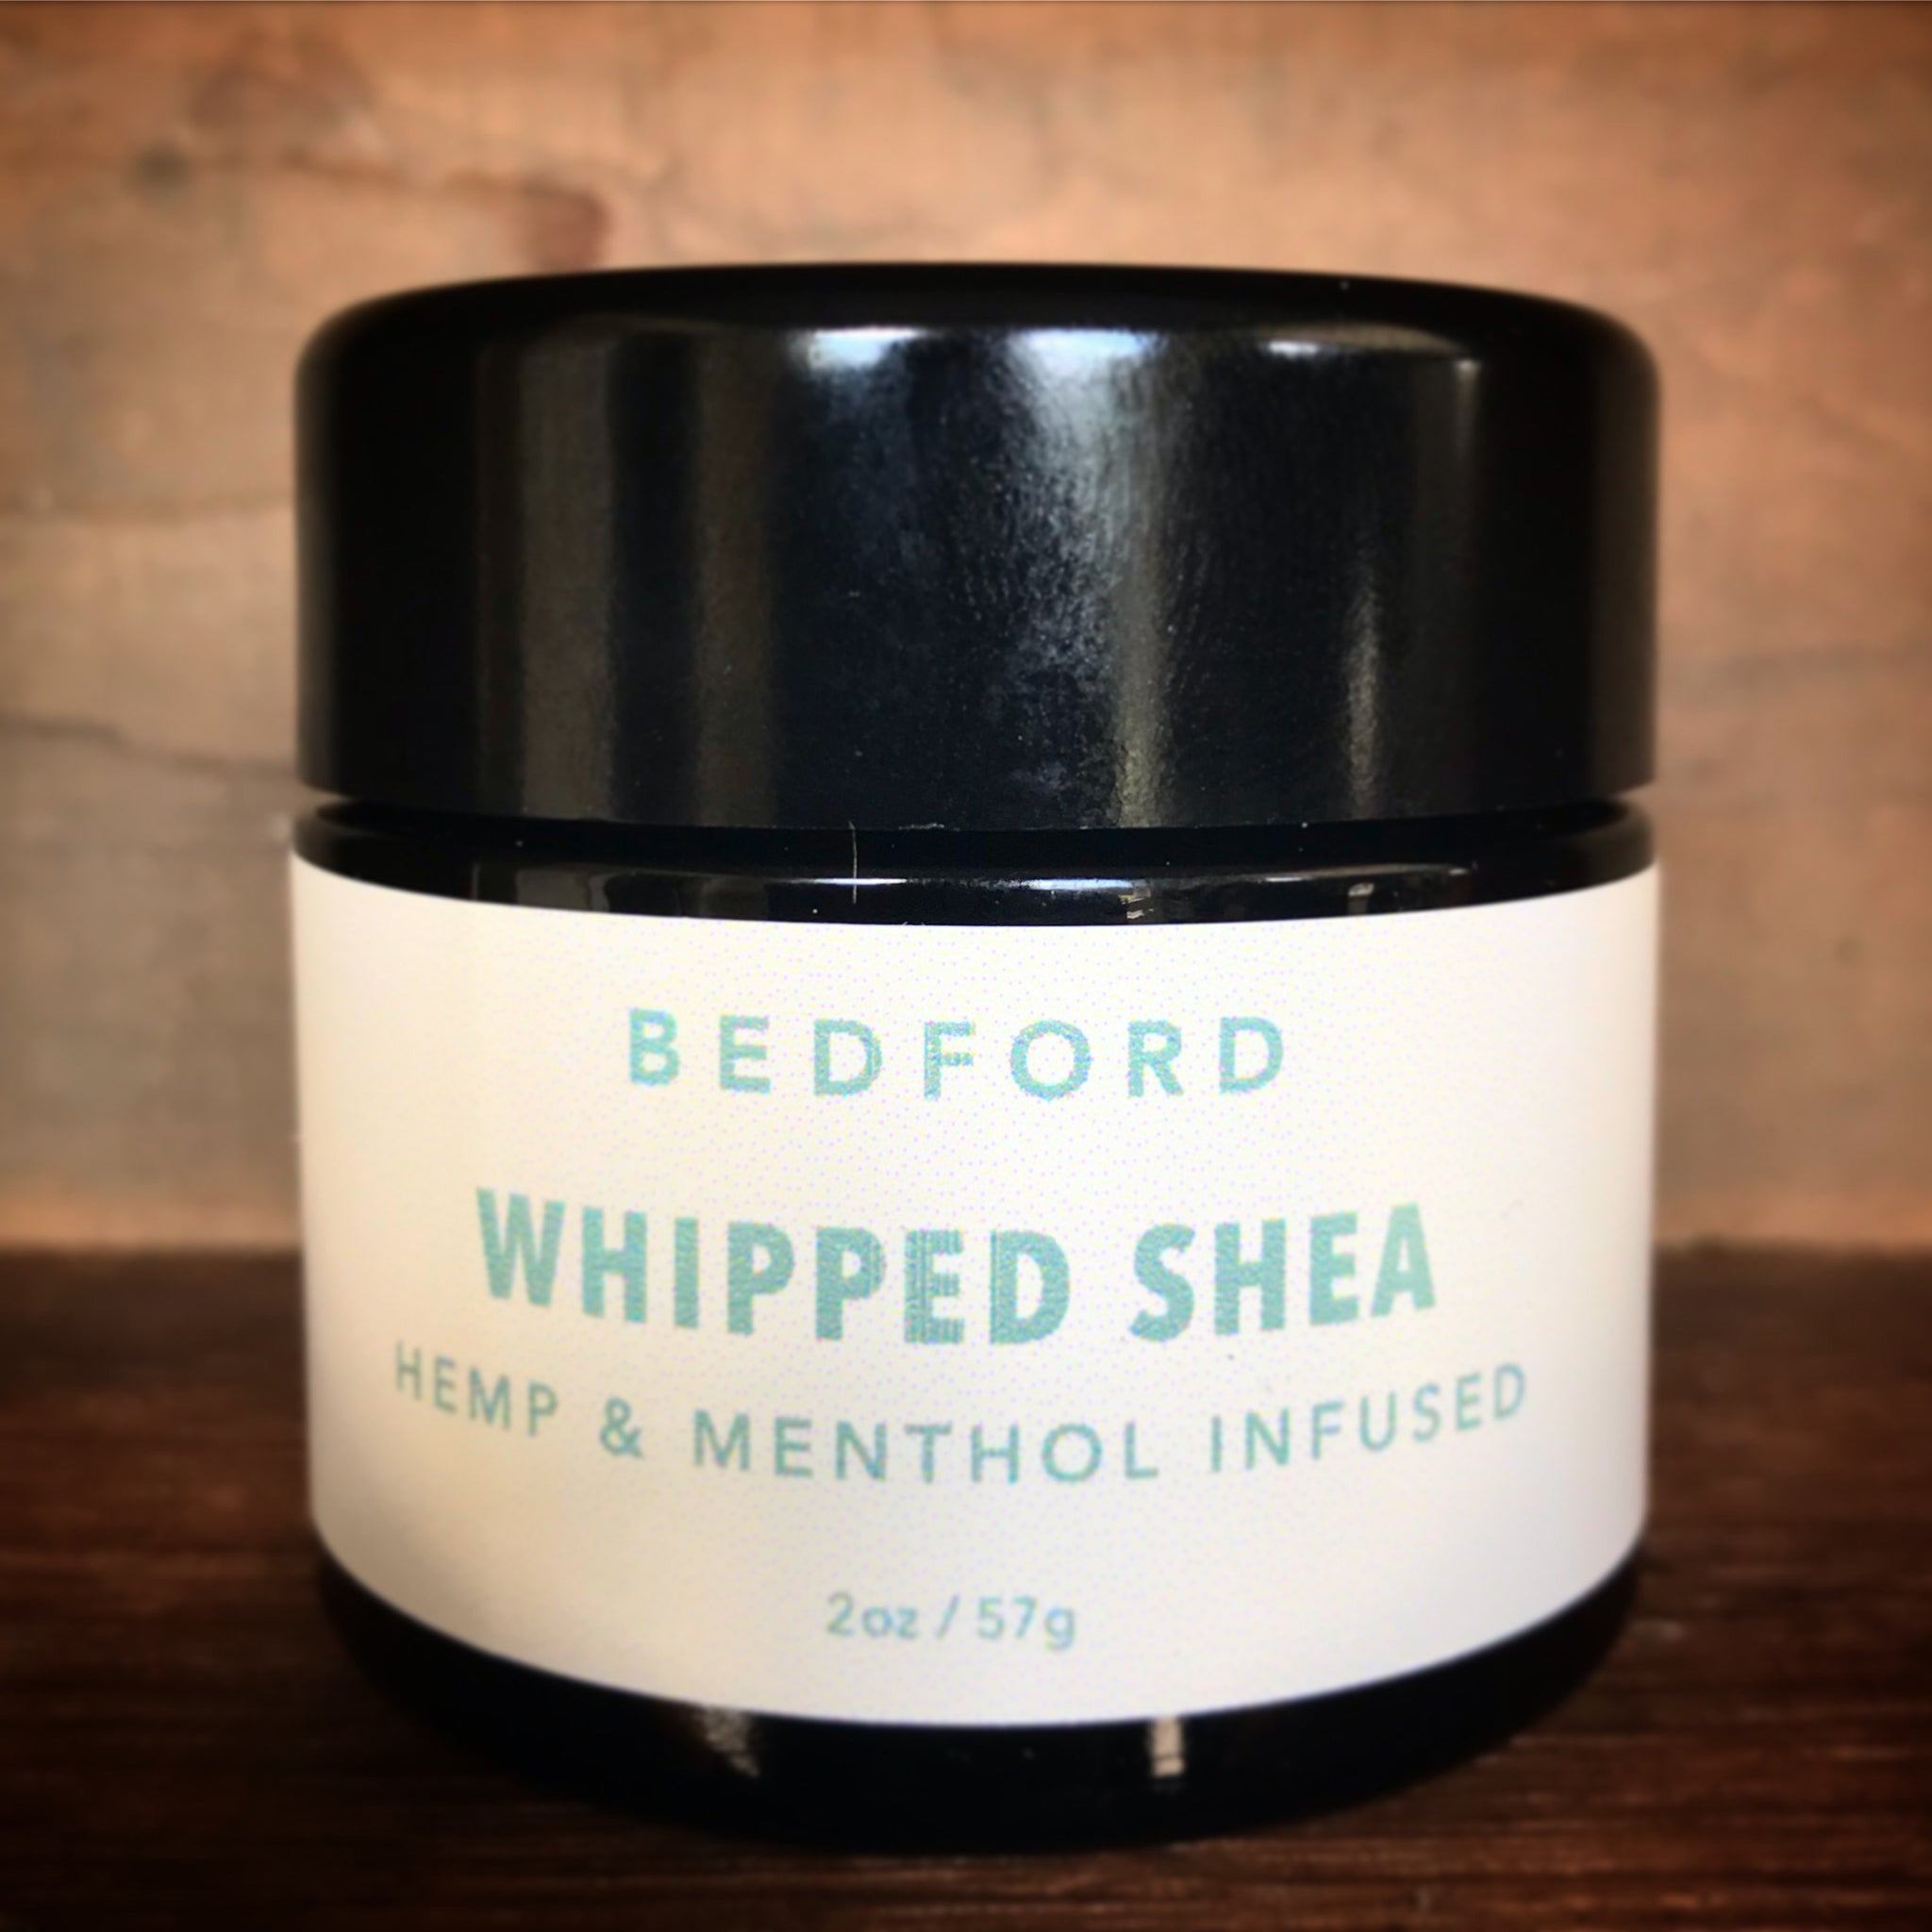 Full Spectrum Hemp & Menthol Whipped Shea – BEDFORD APOTHECARY & SPA